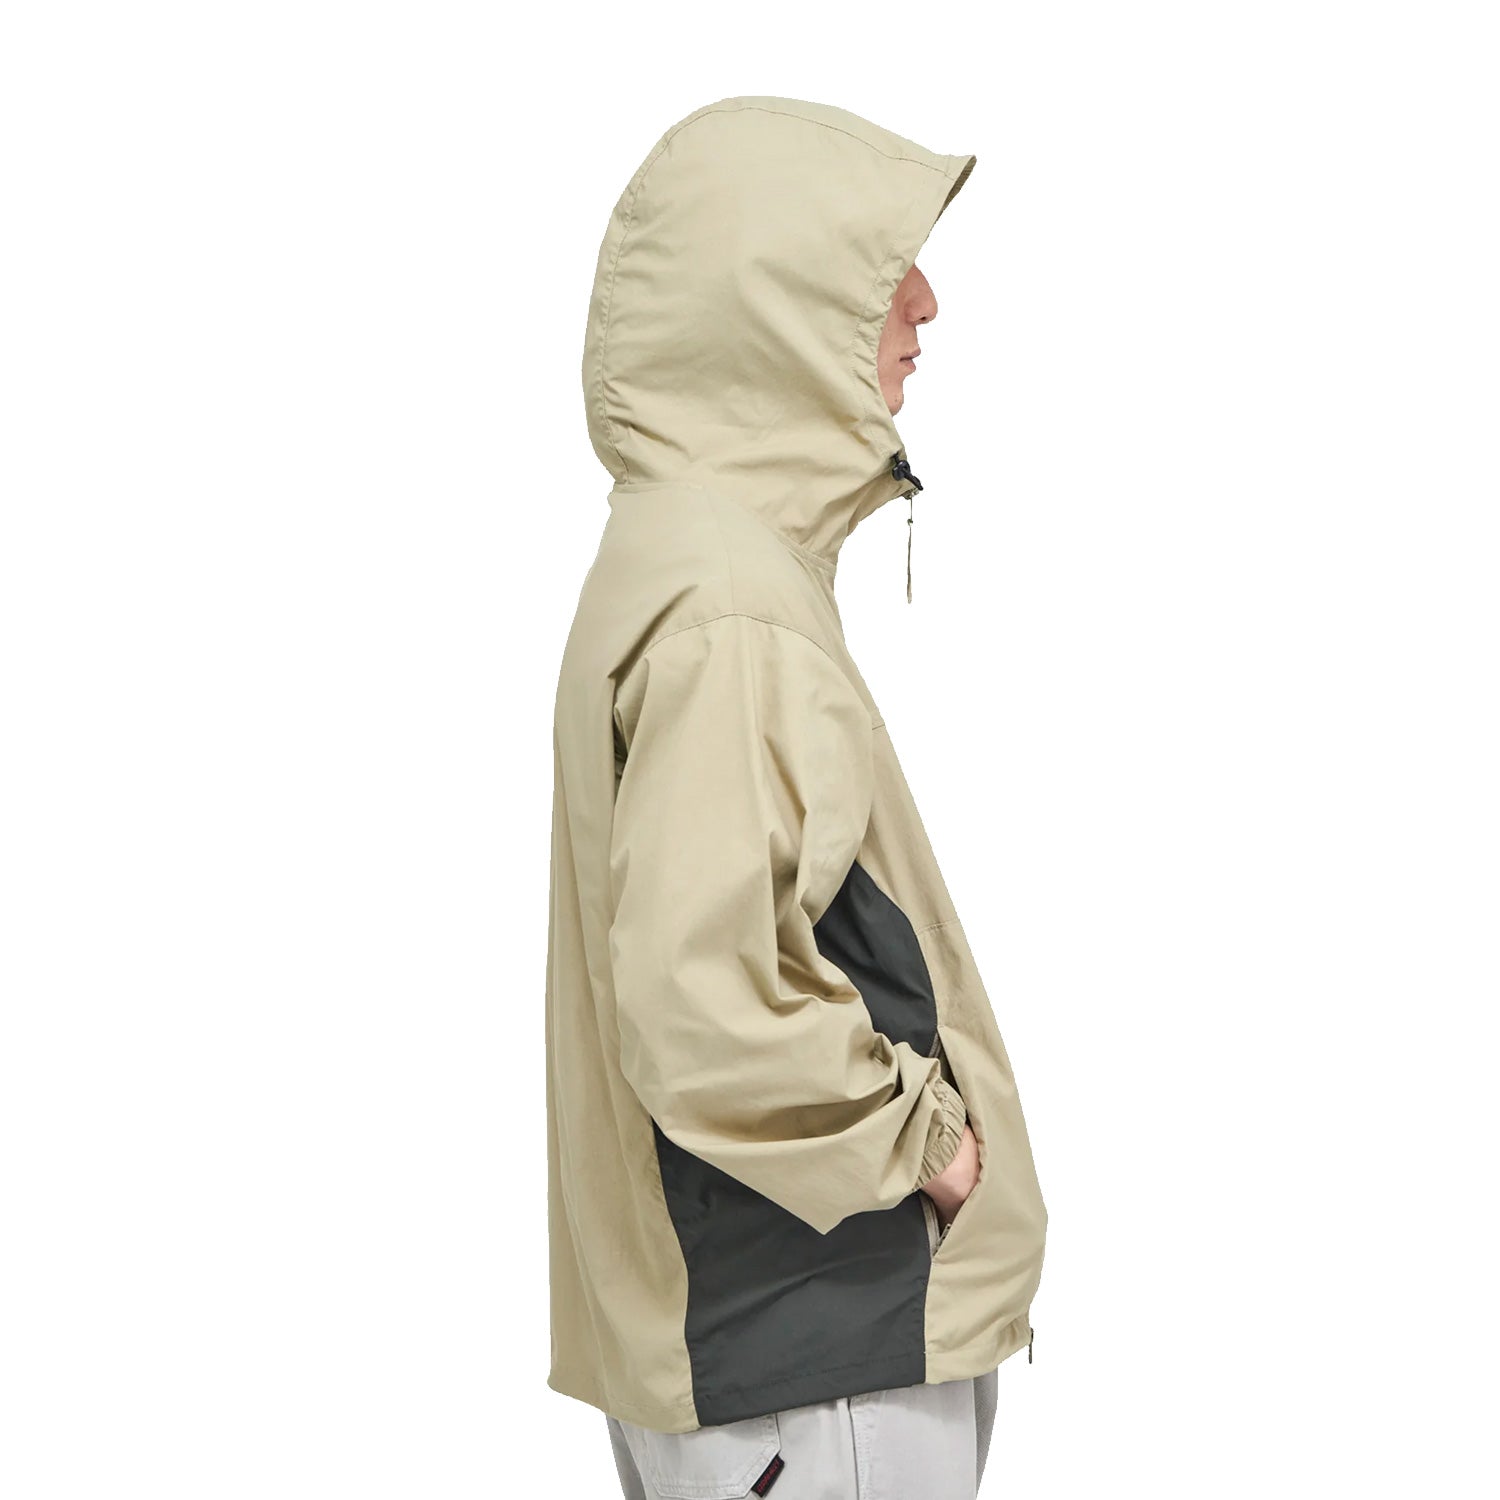 Beige and black gramicci track jacket with hood, elastic cuffs and drawstring waist. Free uk shipping over £50